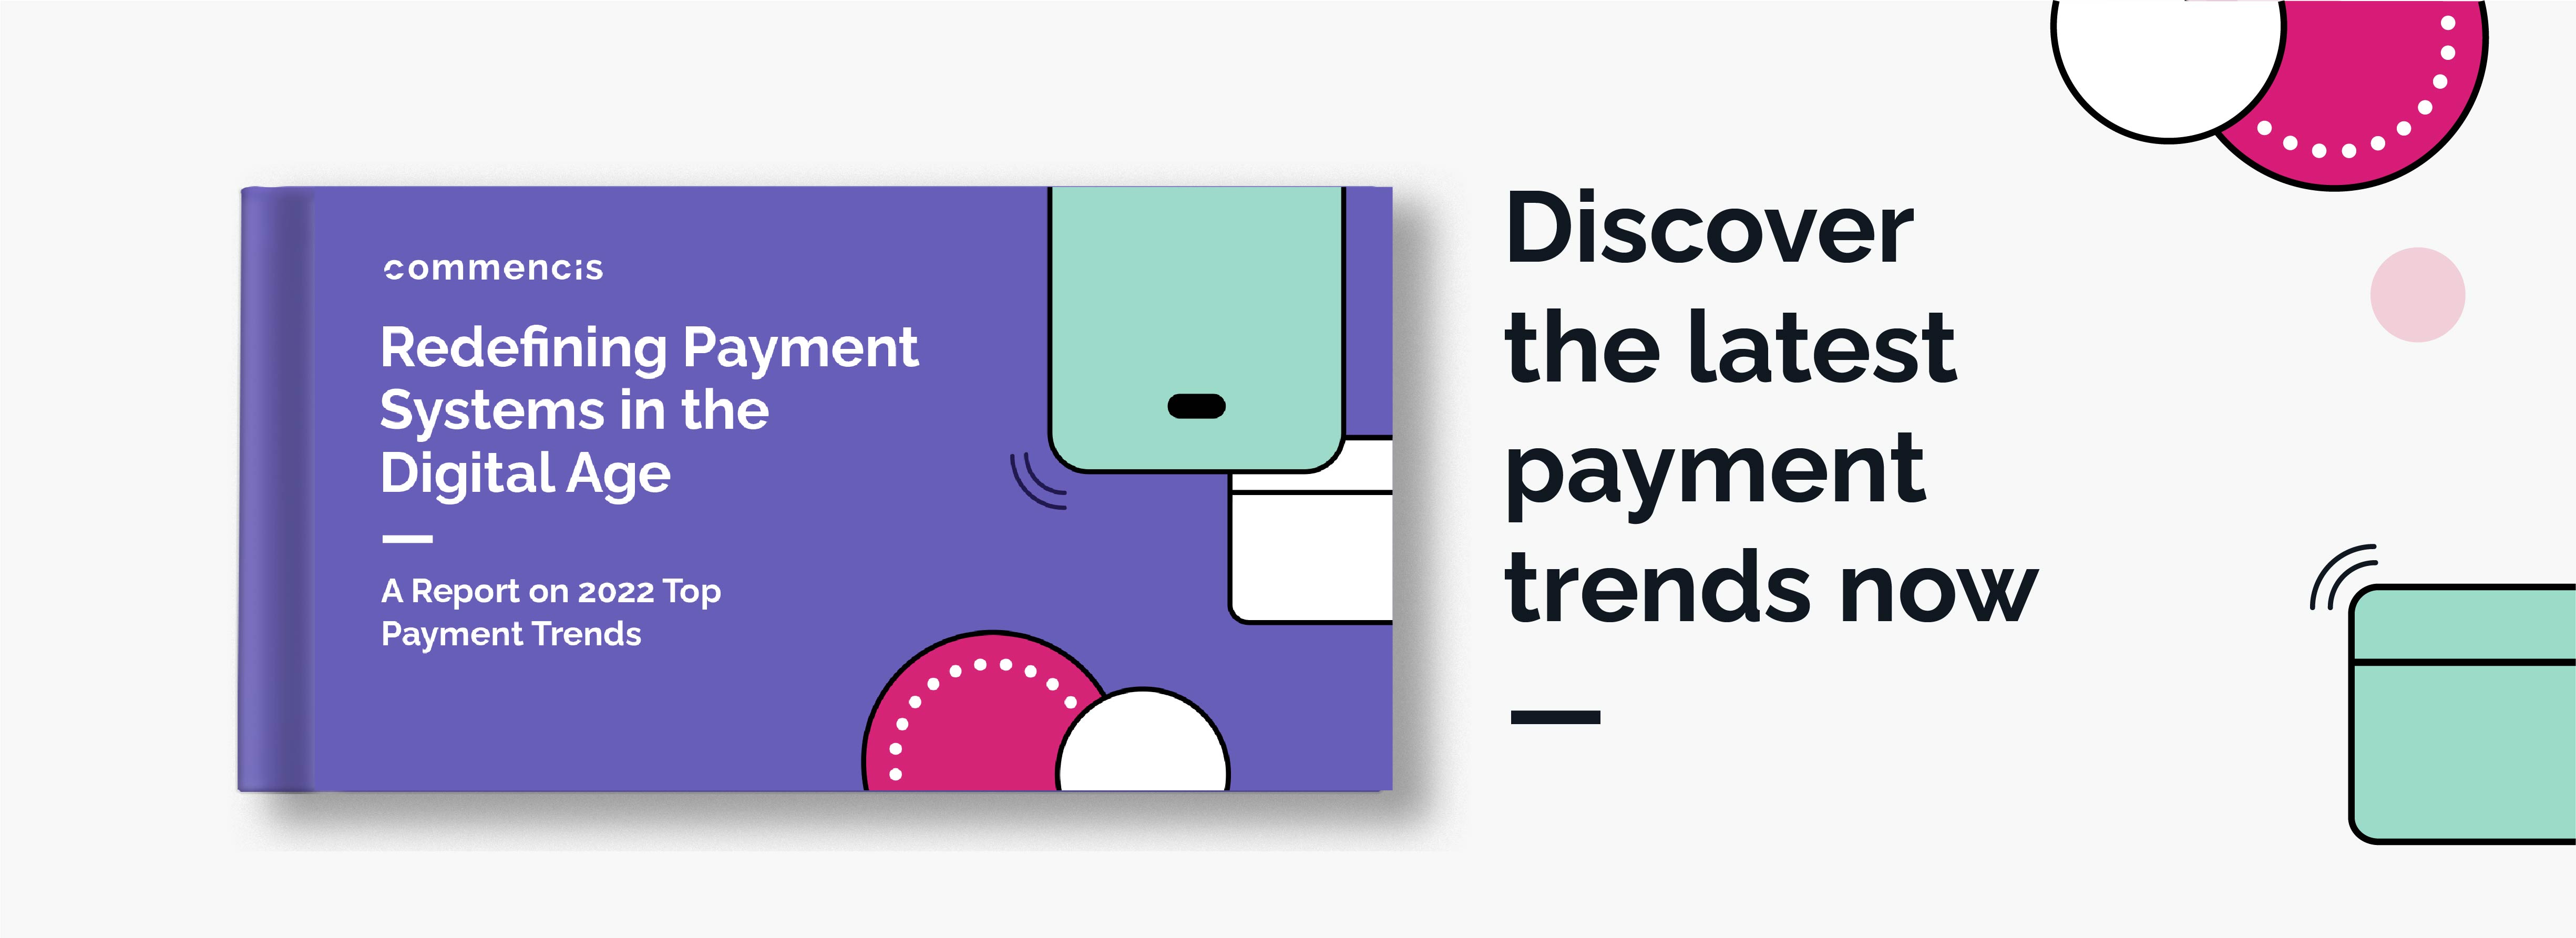 Redefining Payment Systems in the Digital Age